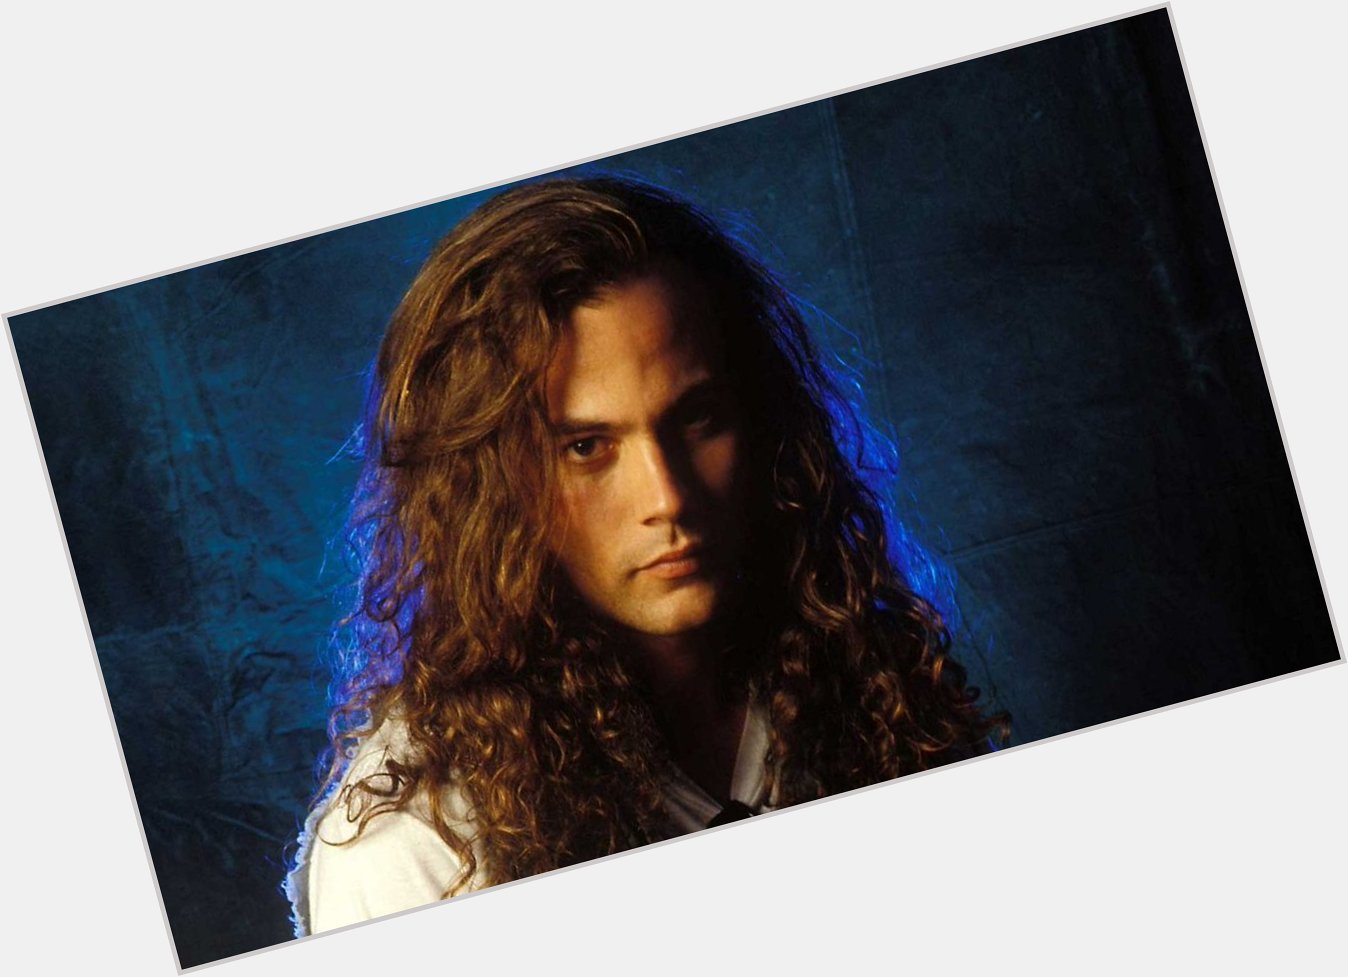 Happy birthday to Mike Starr of Alice in Chains. We miss you friend! 